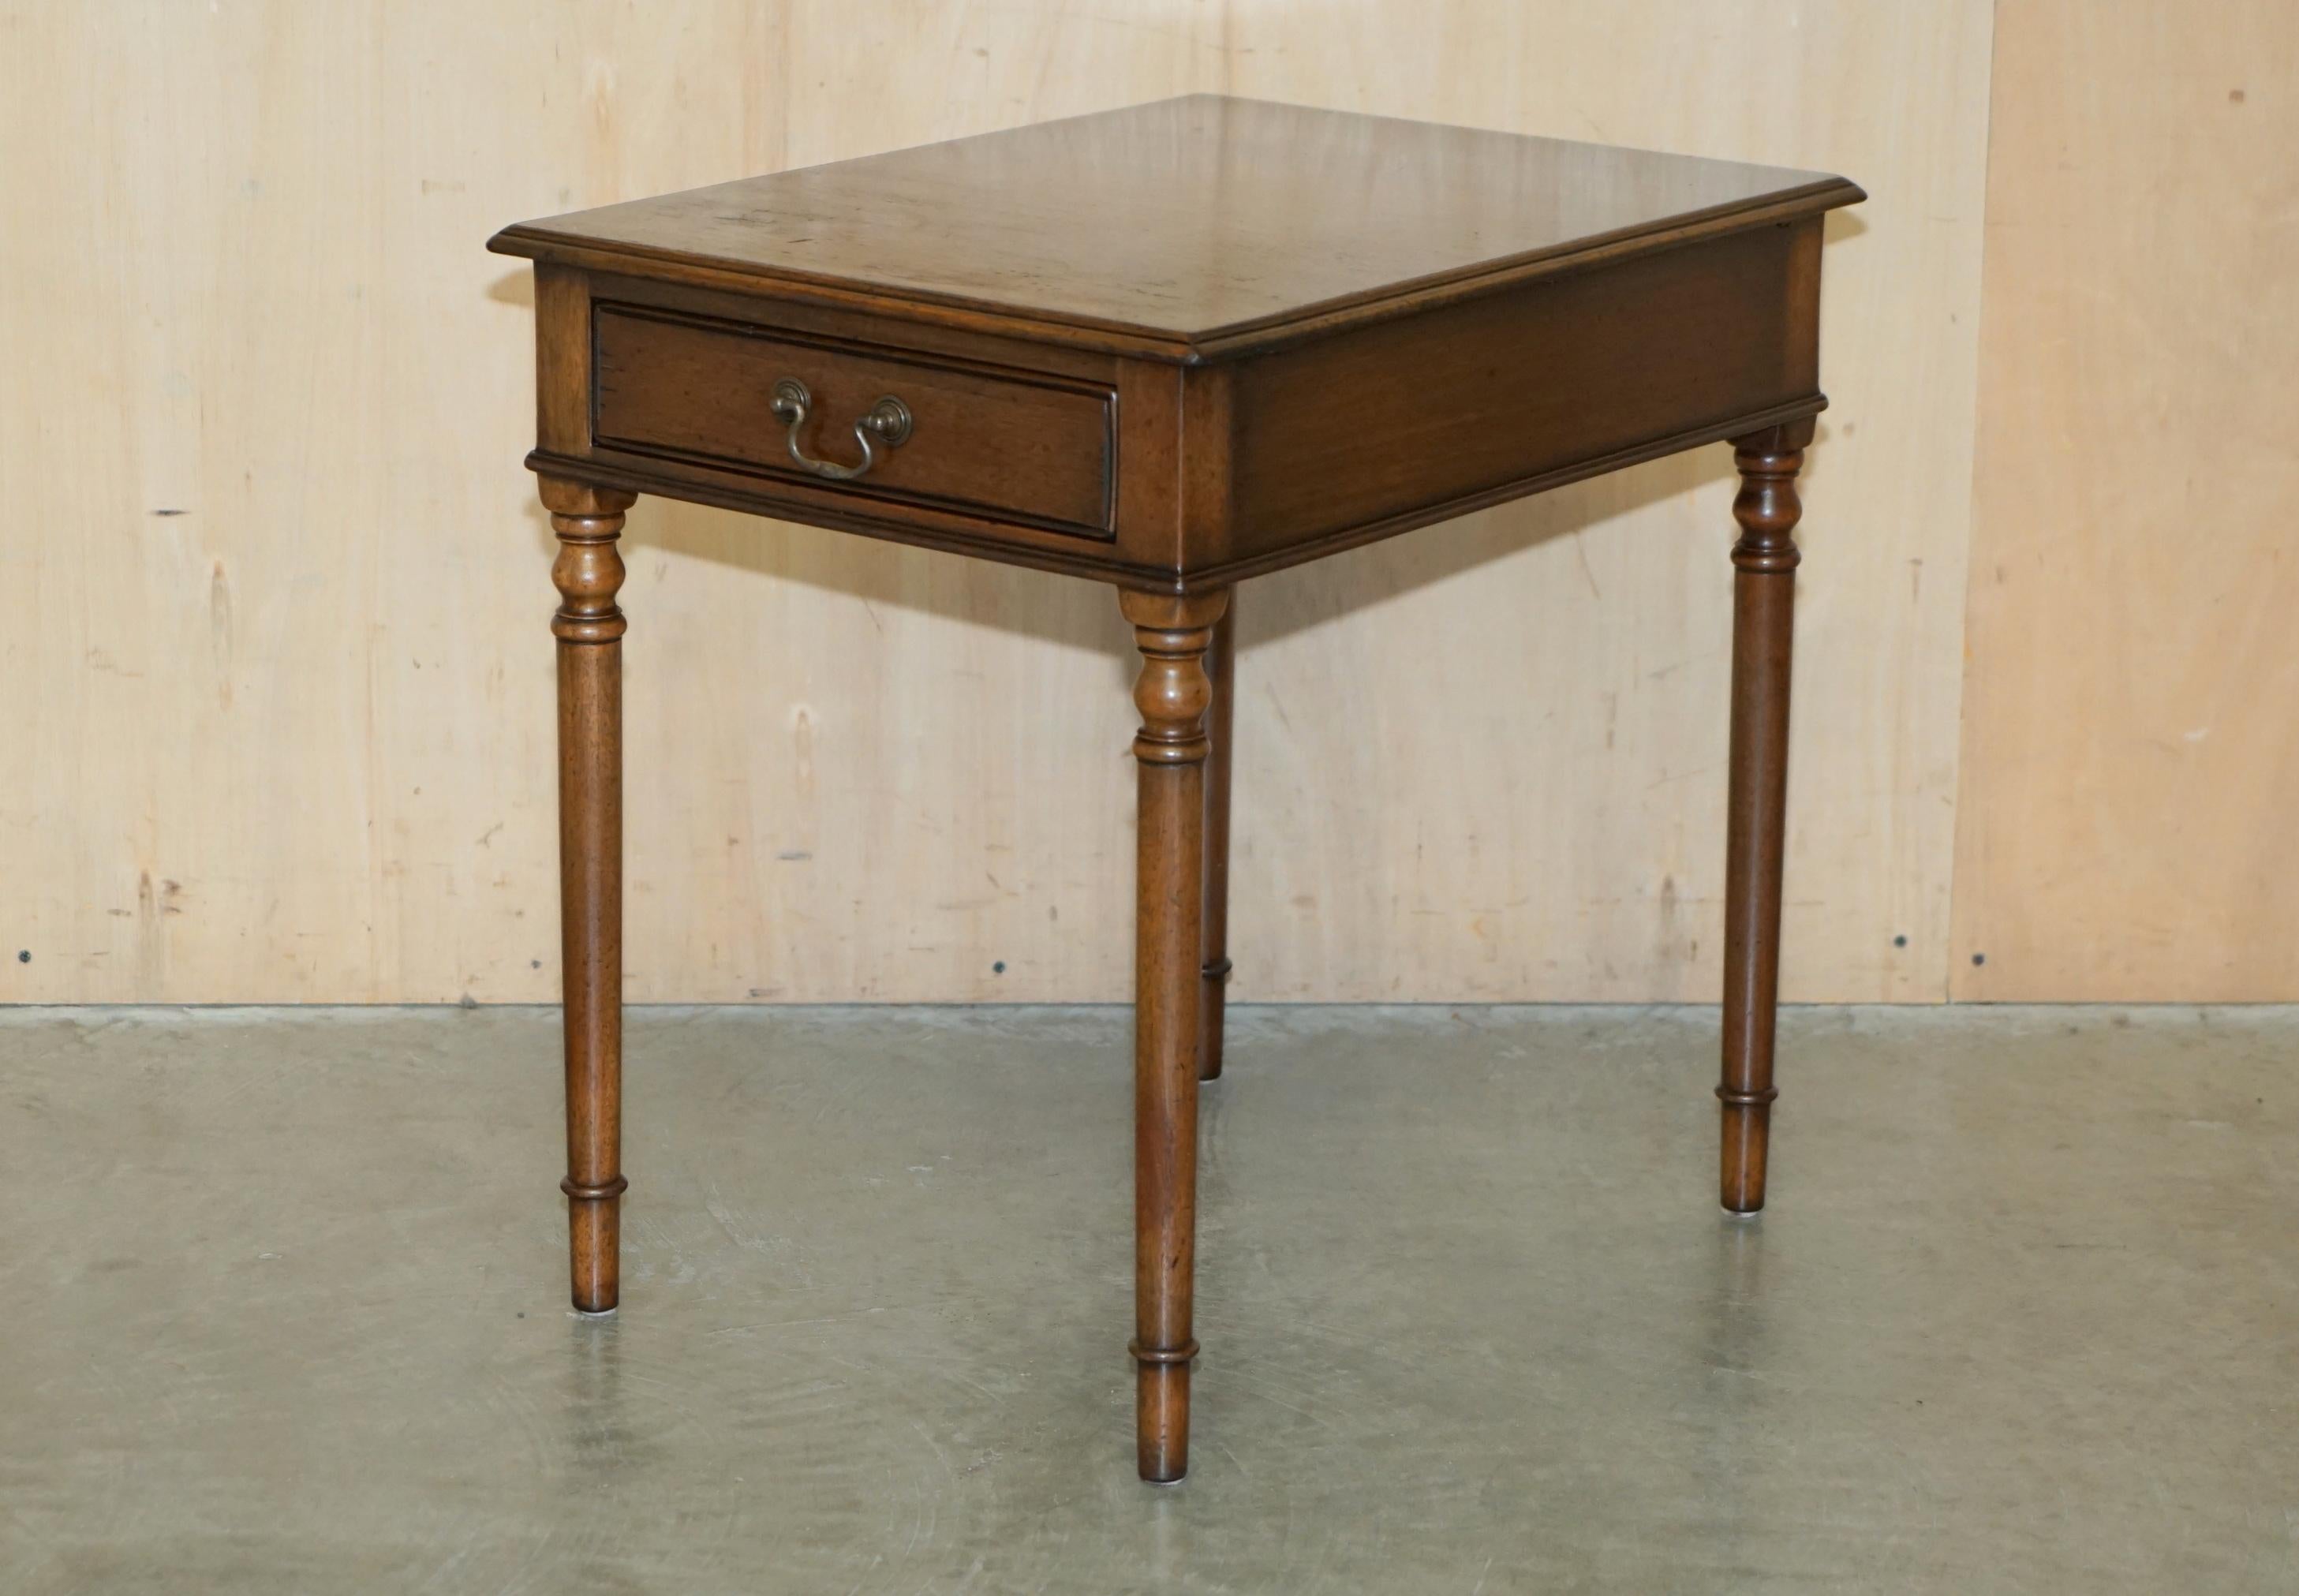 Royal House Antiques

Royal House Antiques is delighted to offer for sale this lovely English Country House Oak side table with full sized single drawer

Please note the delivery fee listed is just a guide, it covers within the M25 only for the UK